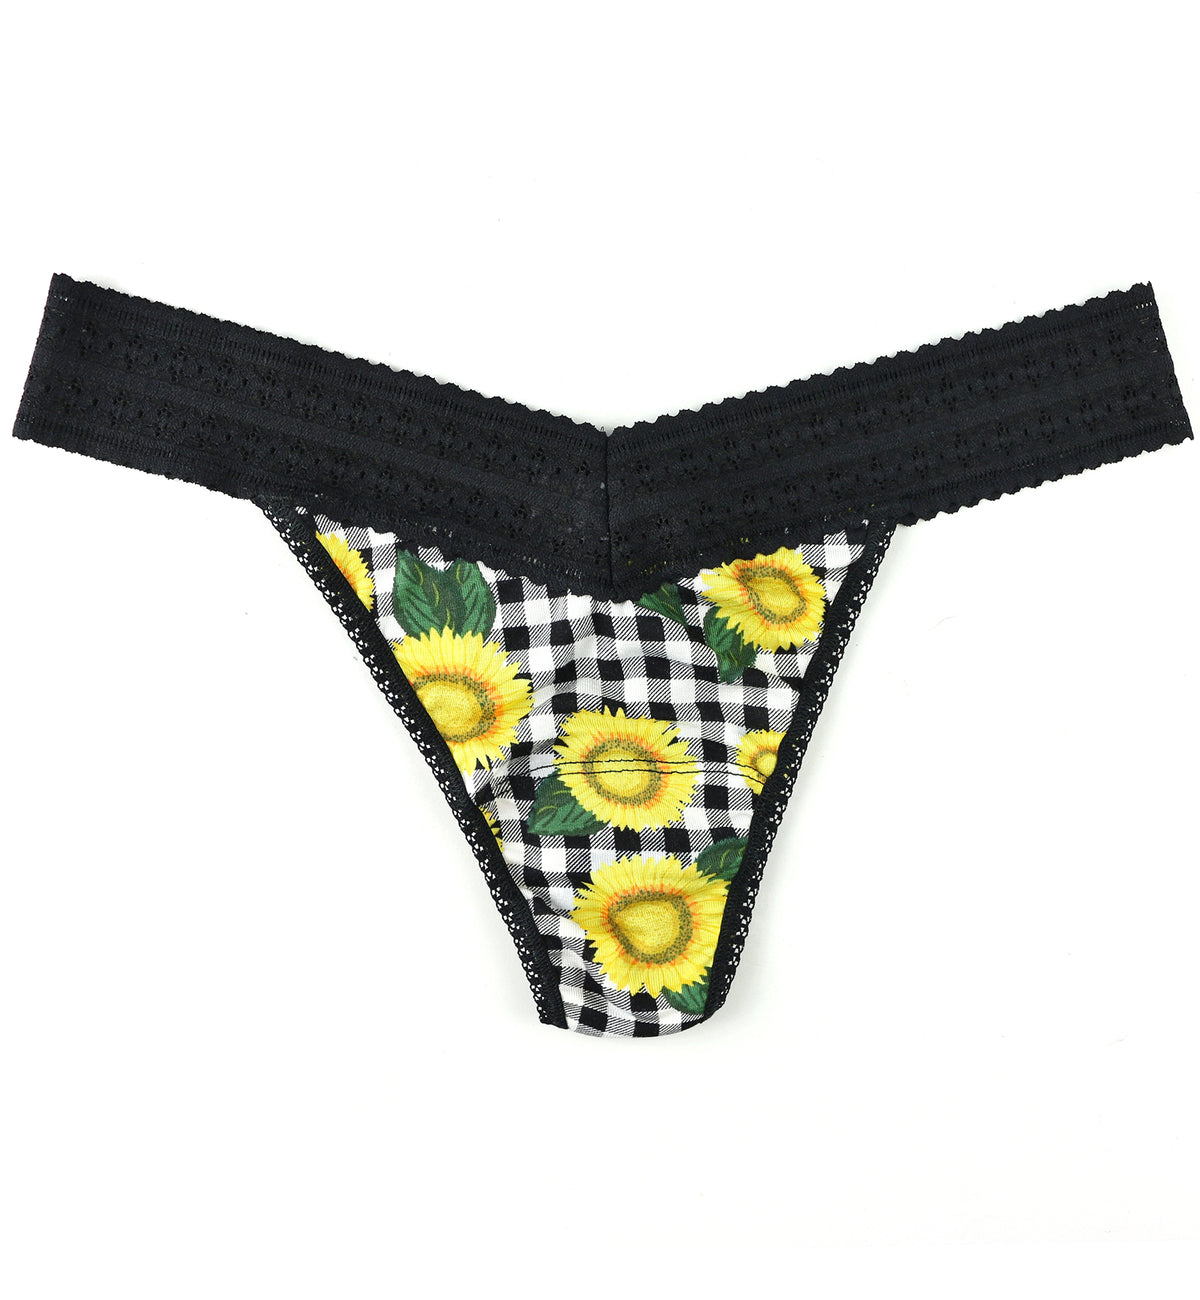 Hanky Panky Dream Printed Original Rise Thong (PR681104),Fields of Gold - Fields of Gold,One Size